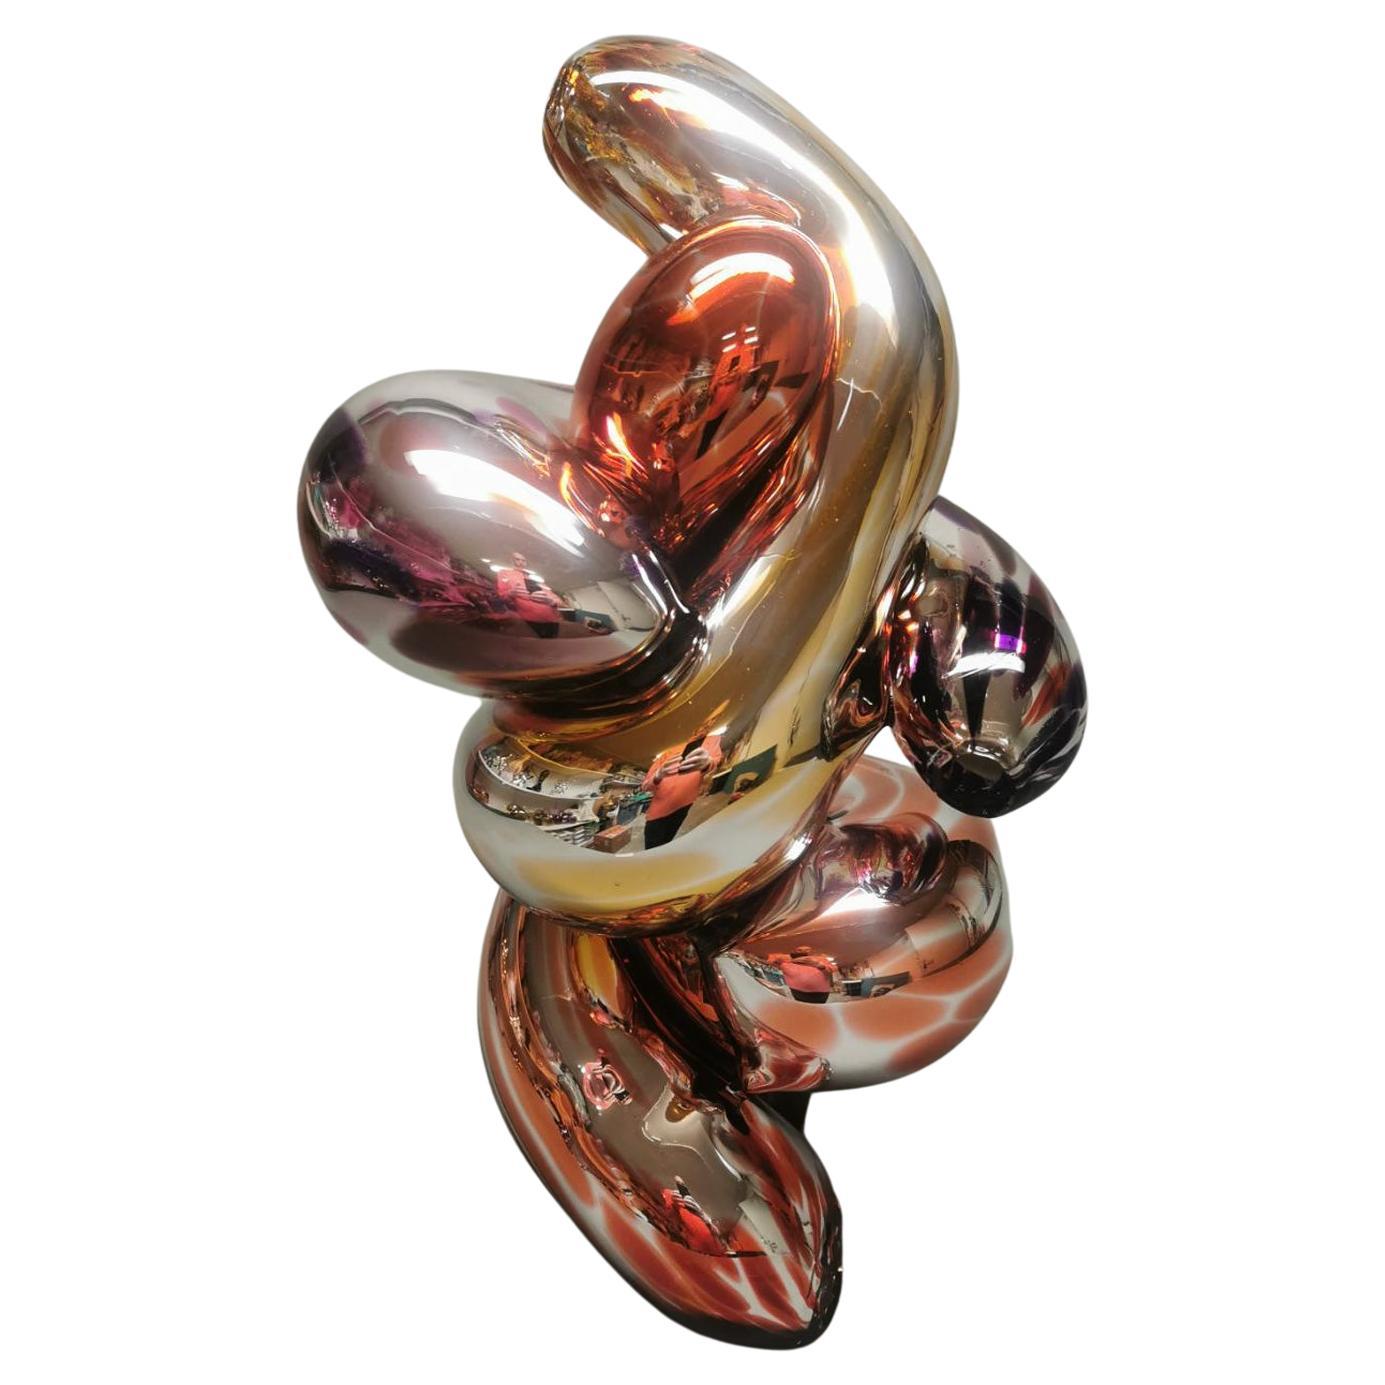 Abstract, Mirrored Glass Sculpture by Markus Emilsson, In Stock